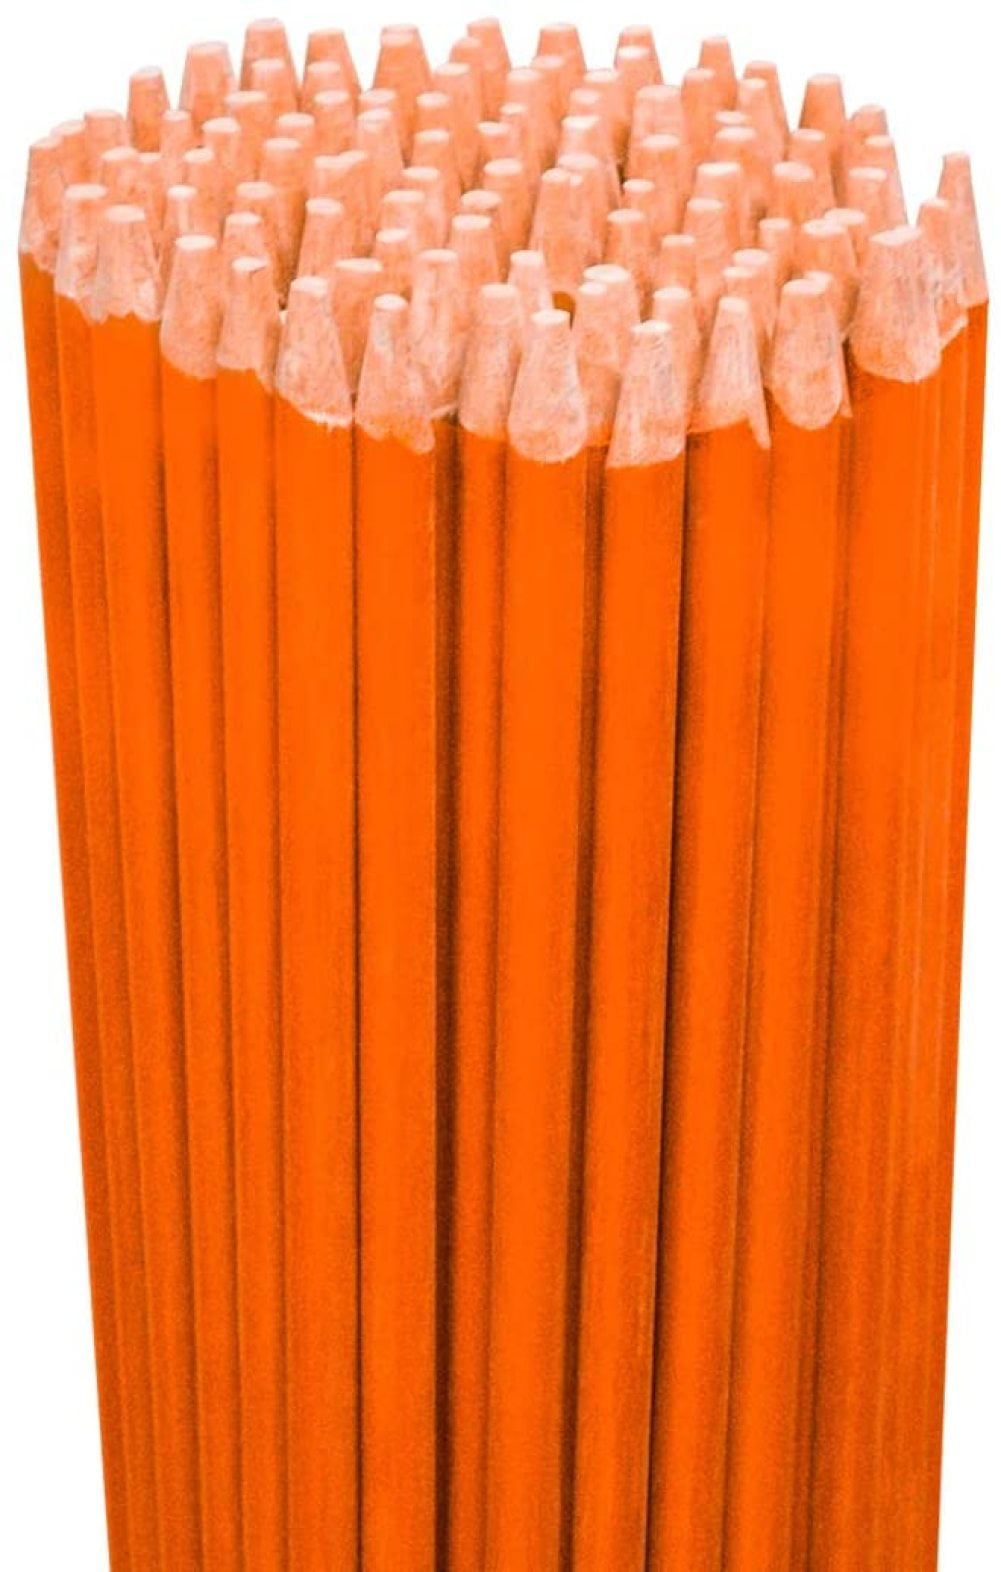 Rods Stakes Guides 50PK 48 Heavy Duty 5/16” Diameter Hi Visibility Safety Orange Driveway Markers w/Reflective Tape 